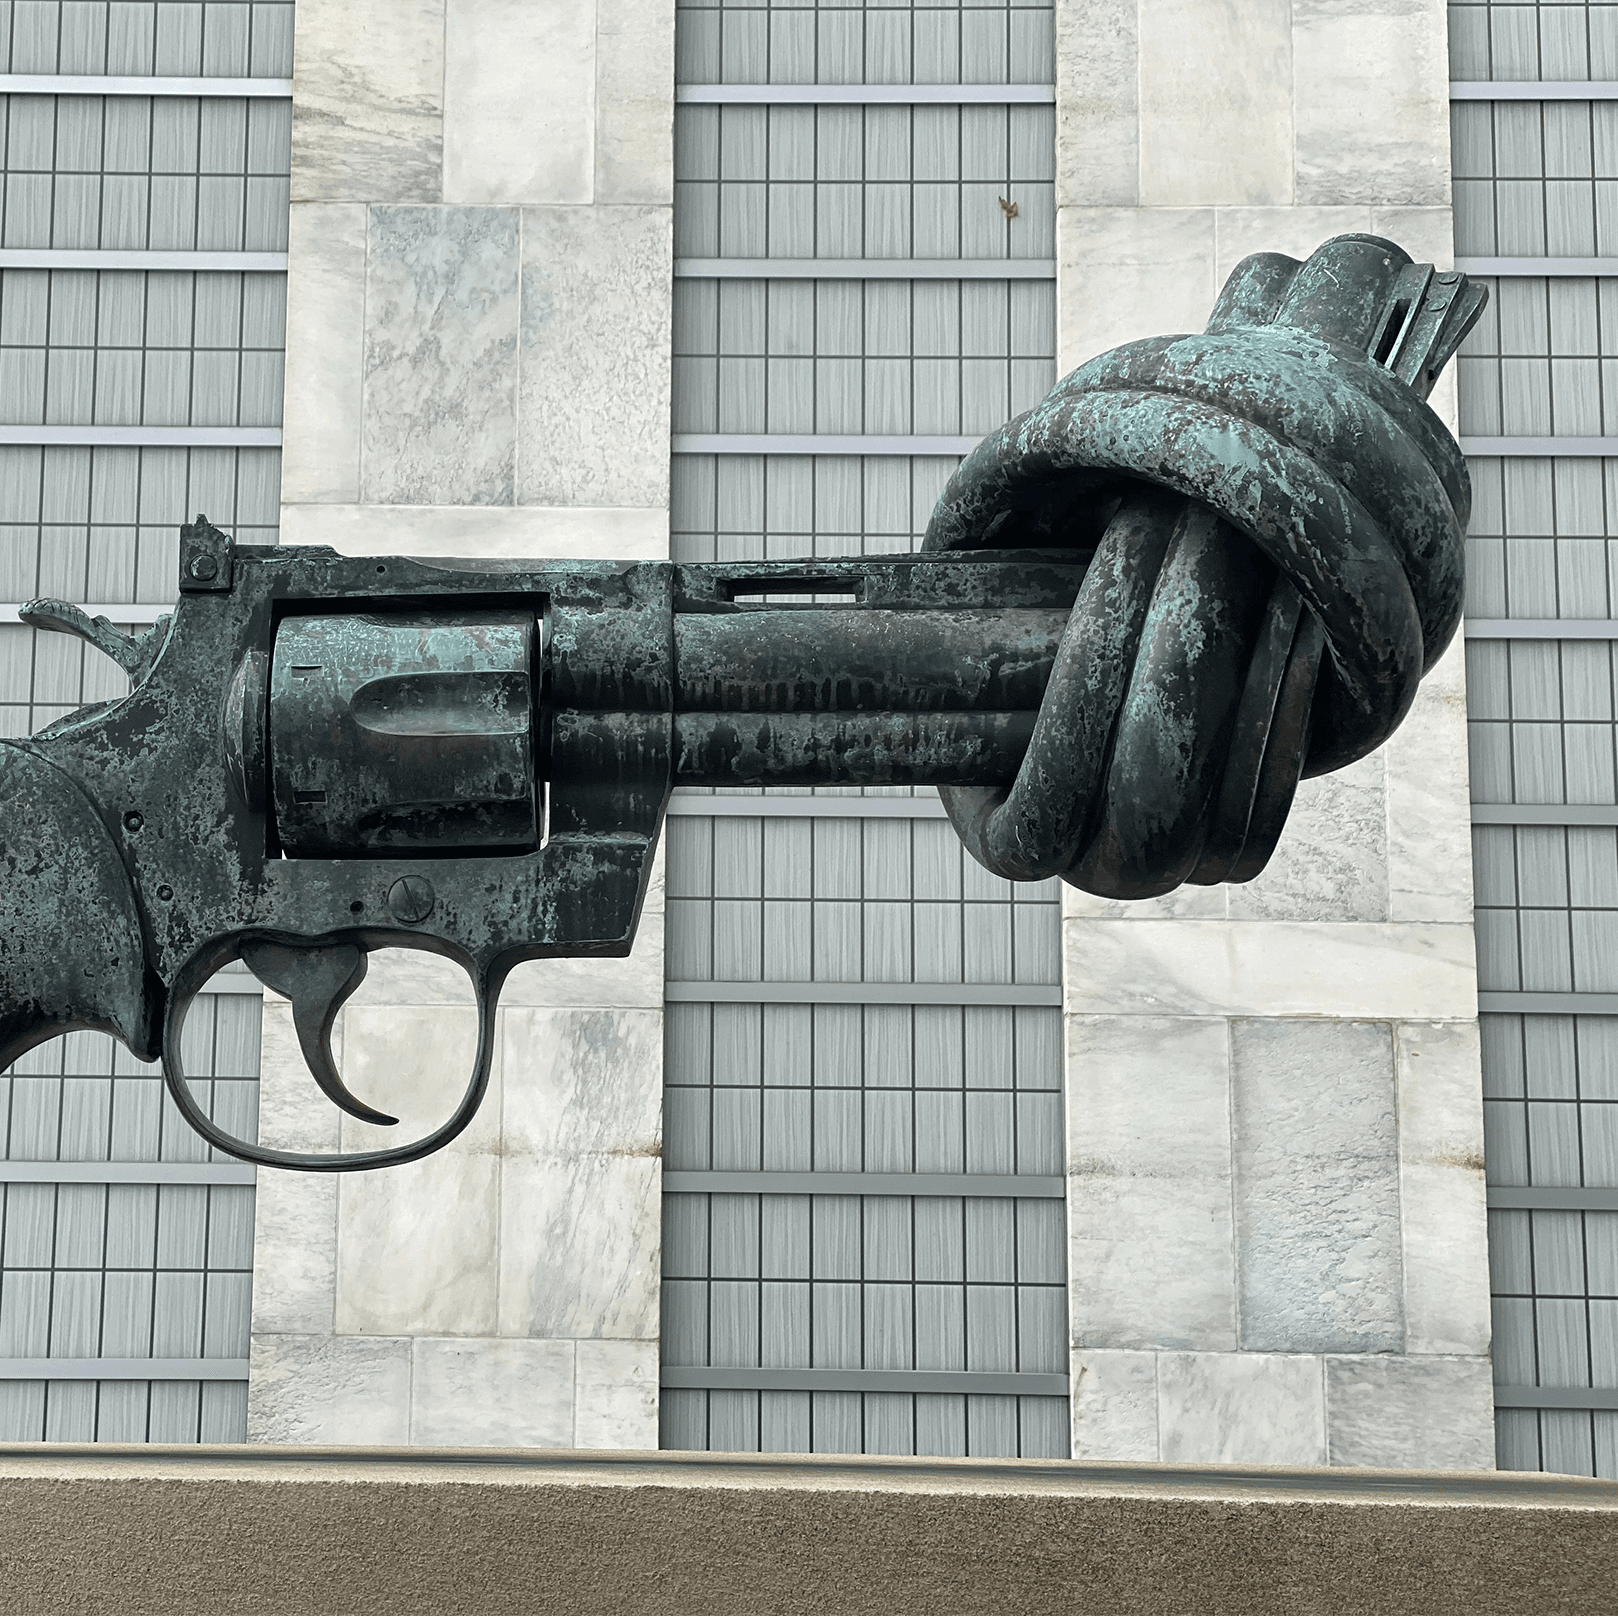 sculpture of gun with twisted end